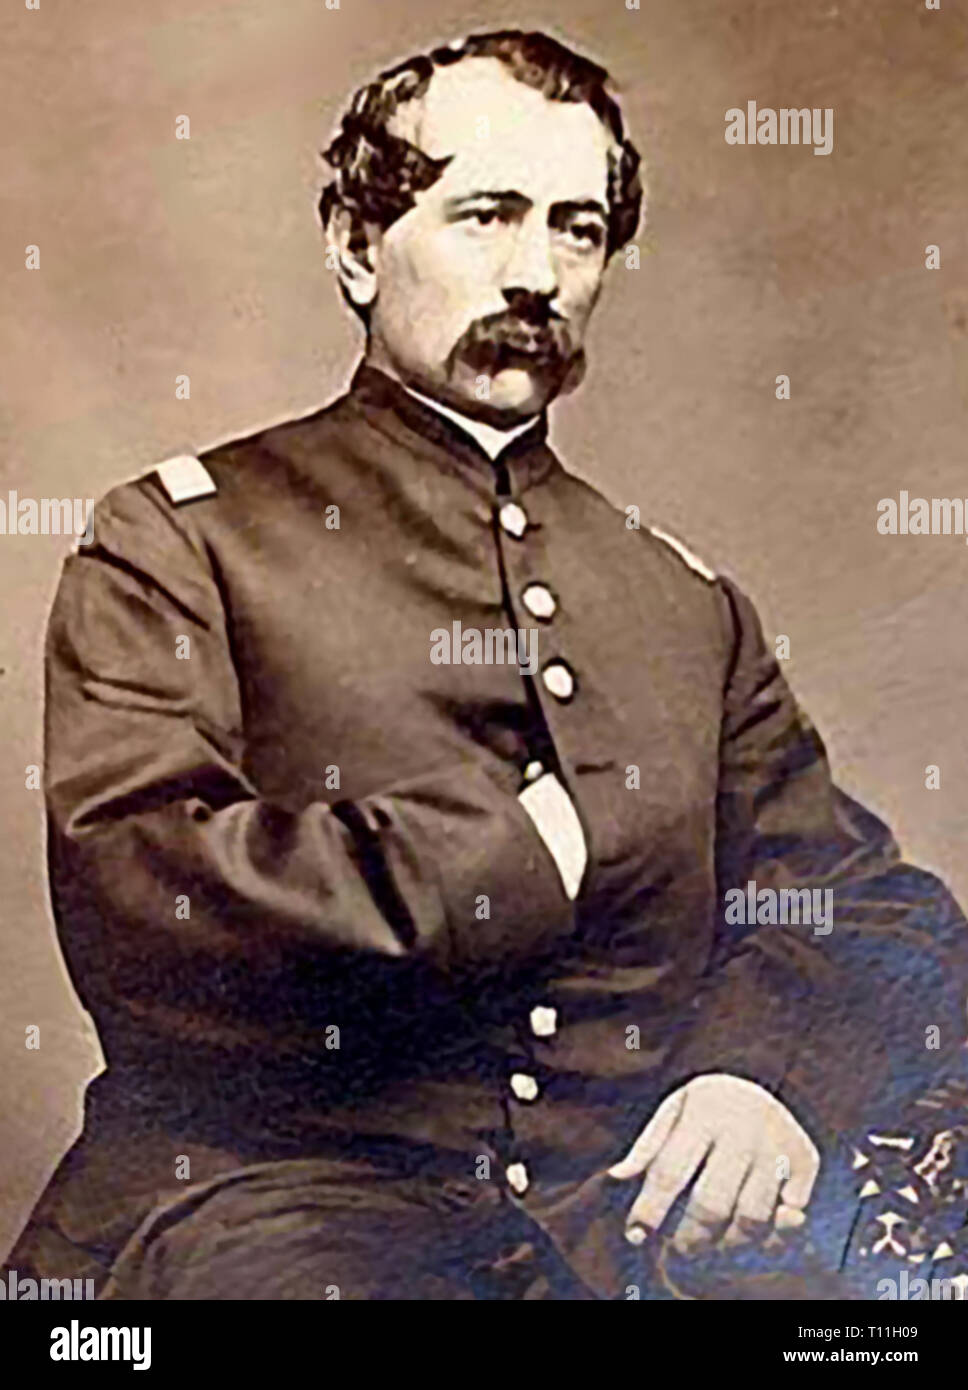 Photos of early America-Civil War Union officer photo. Stock Photo